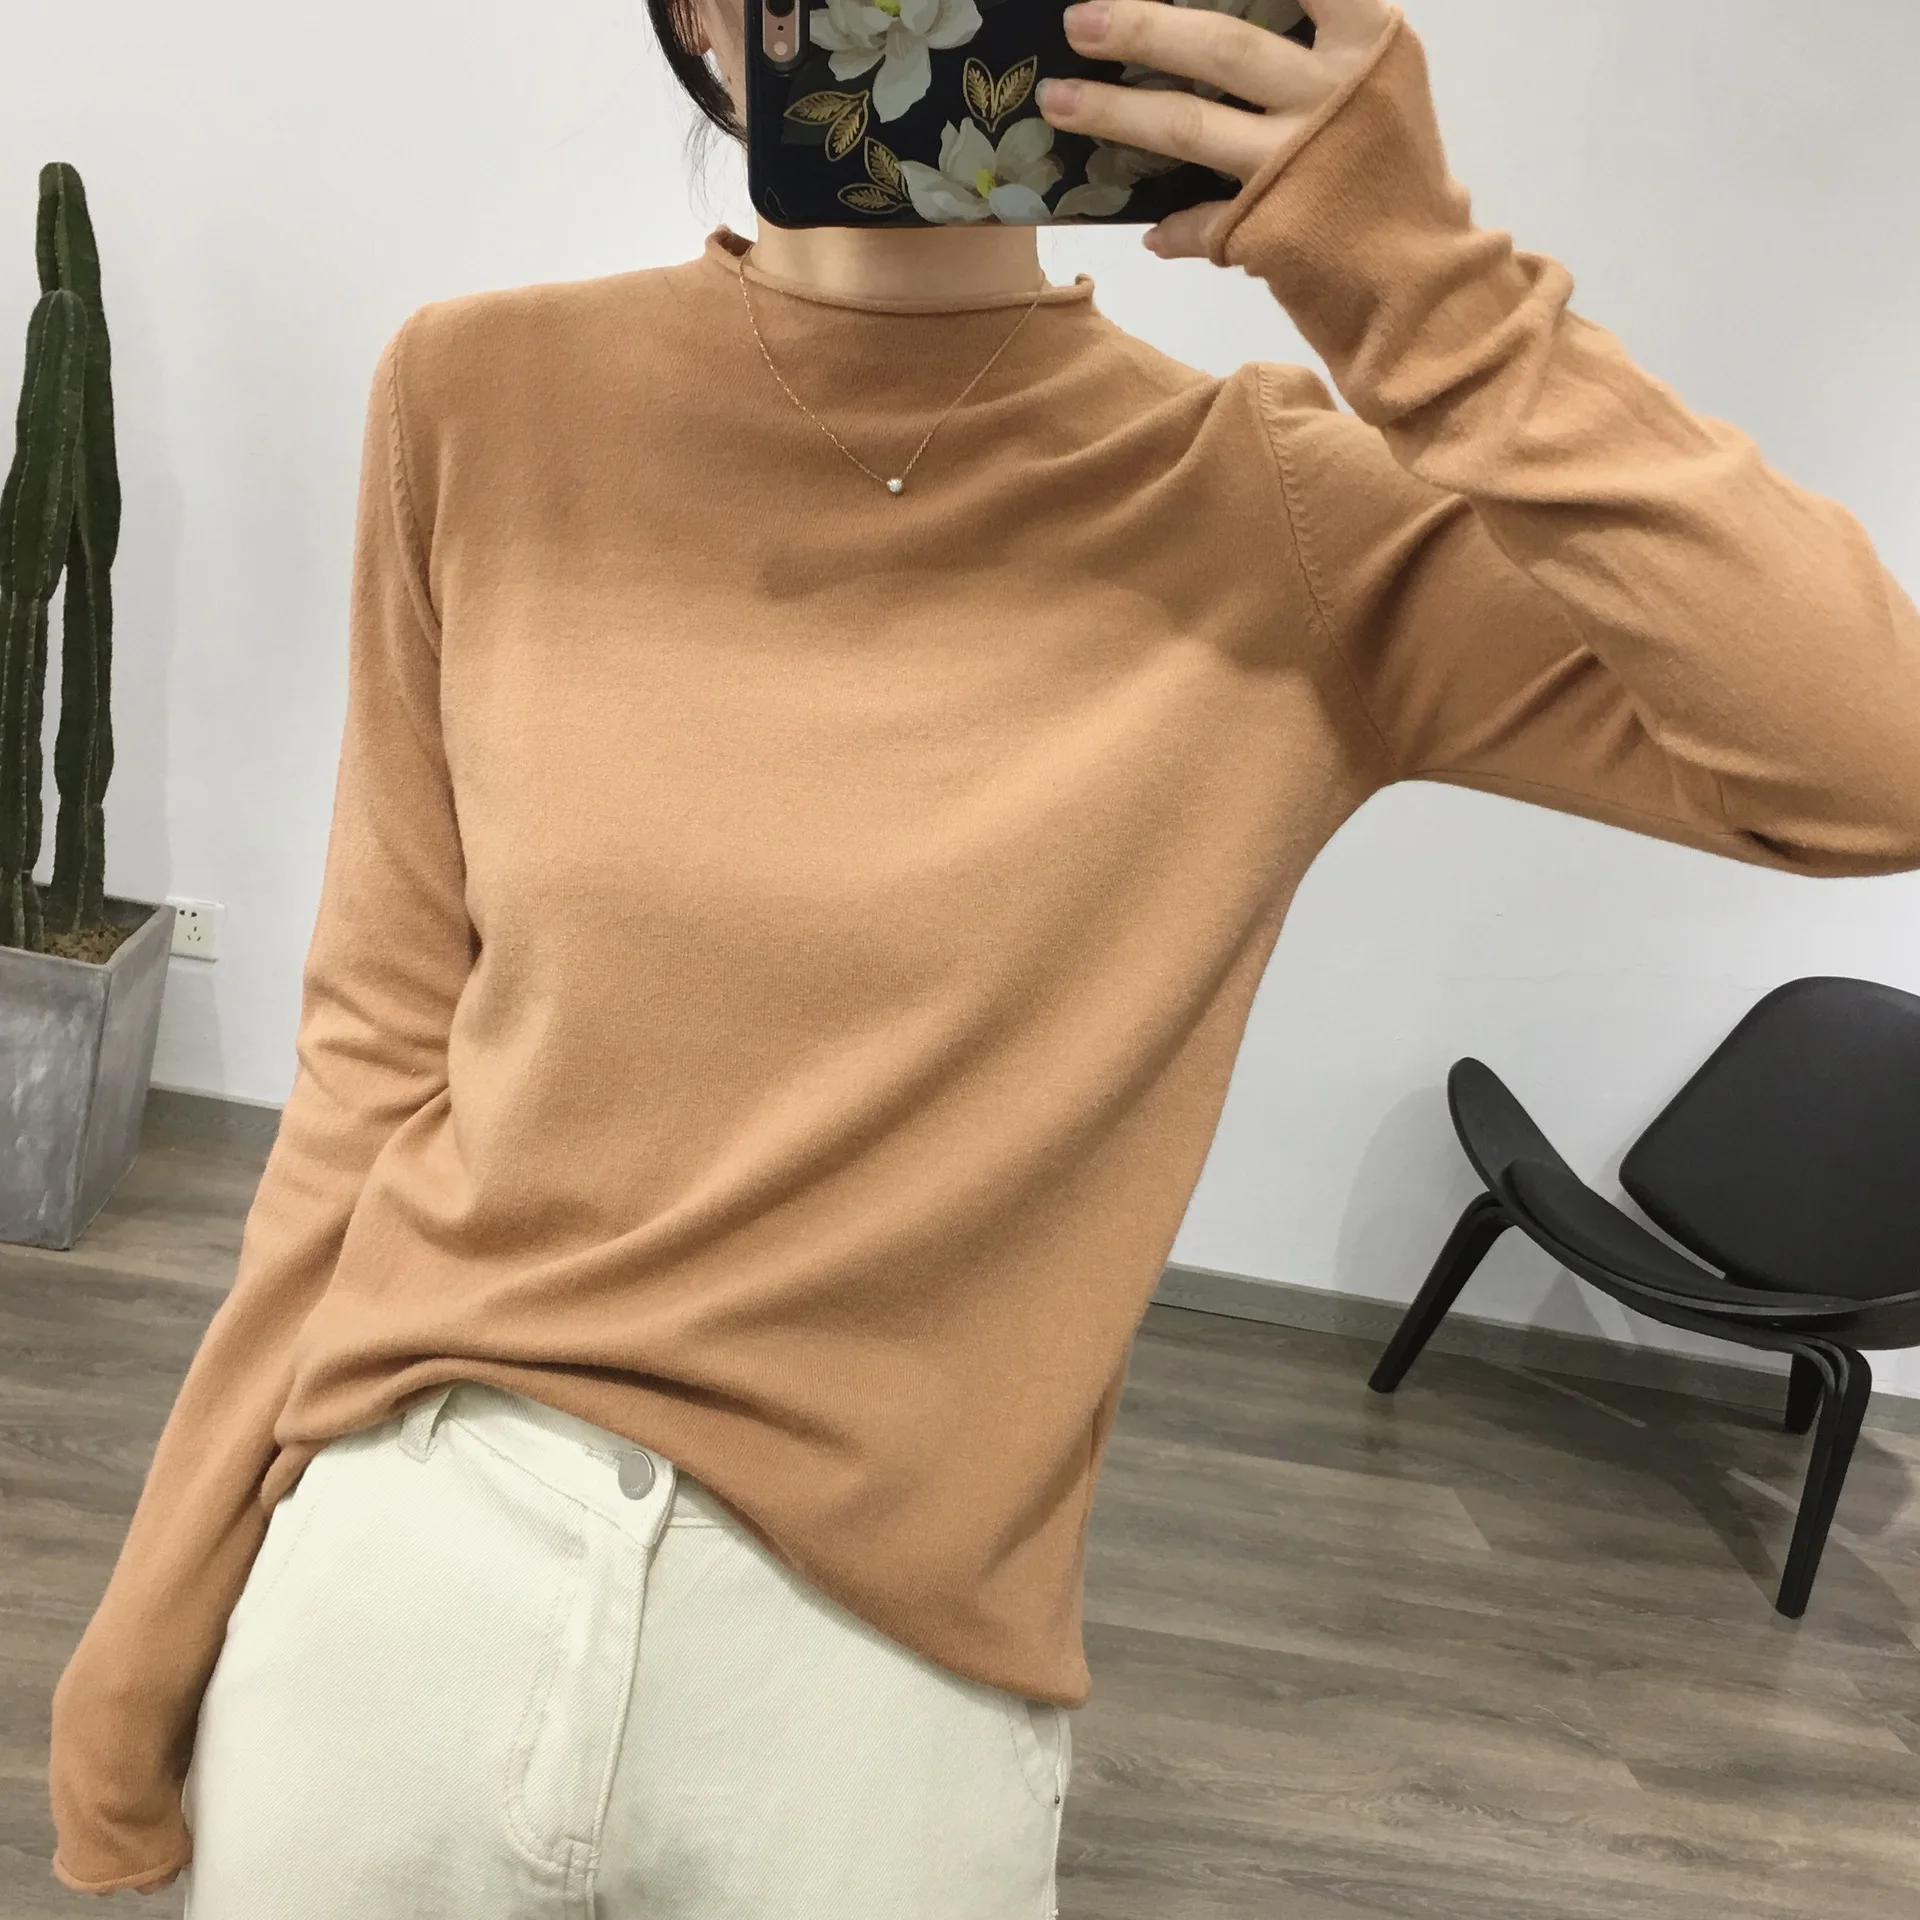 

Basic Sweater Women Fashion Autumn Turtleneck Long Sleeve Sweaters Soft Pullovers Ladies Must Have Knitting Sweaters